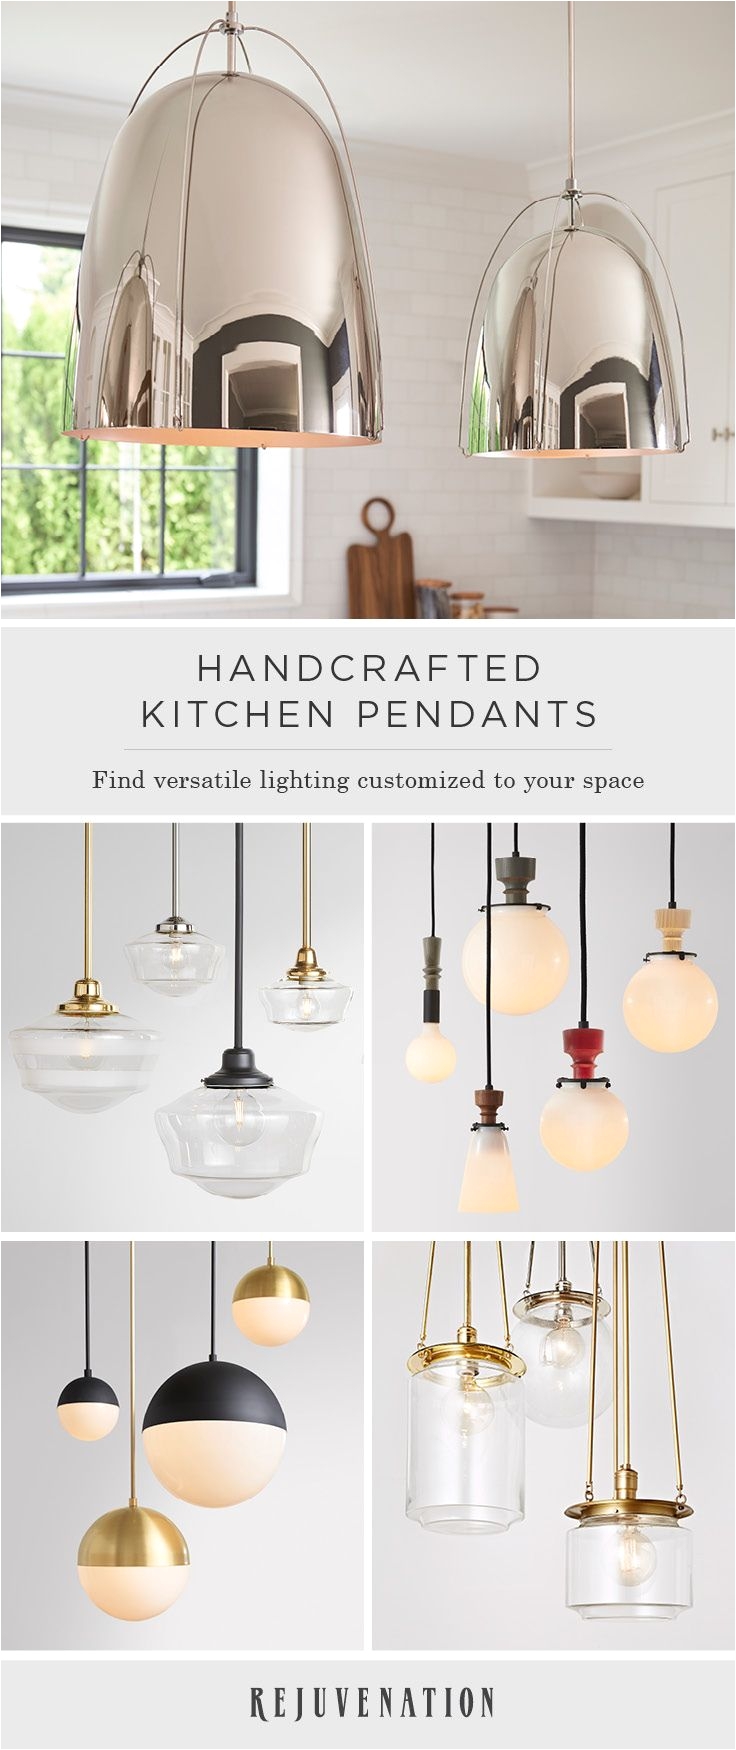 create the perfect kitchen pendant for your space with our customizable lighting handcrafted to order in portland oregon customize your kitchen